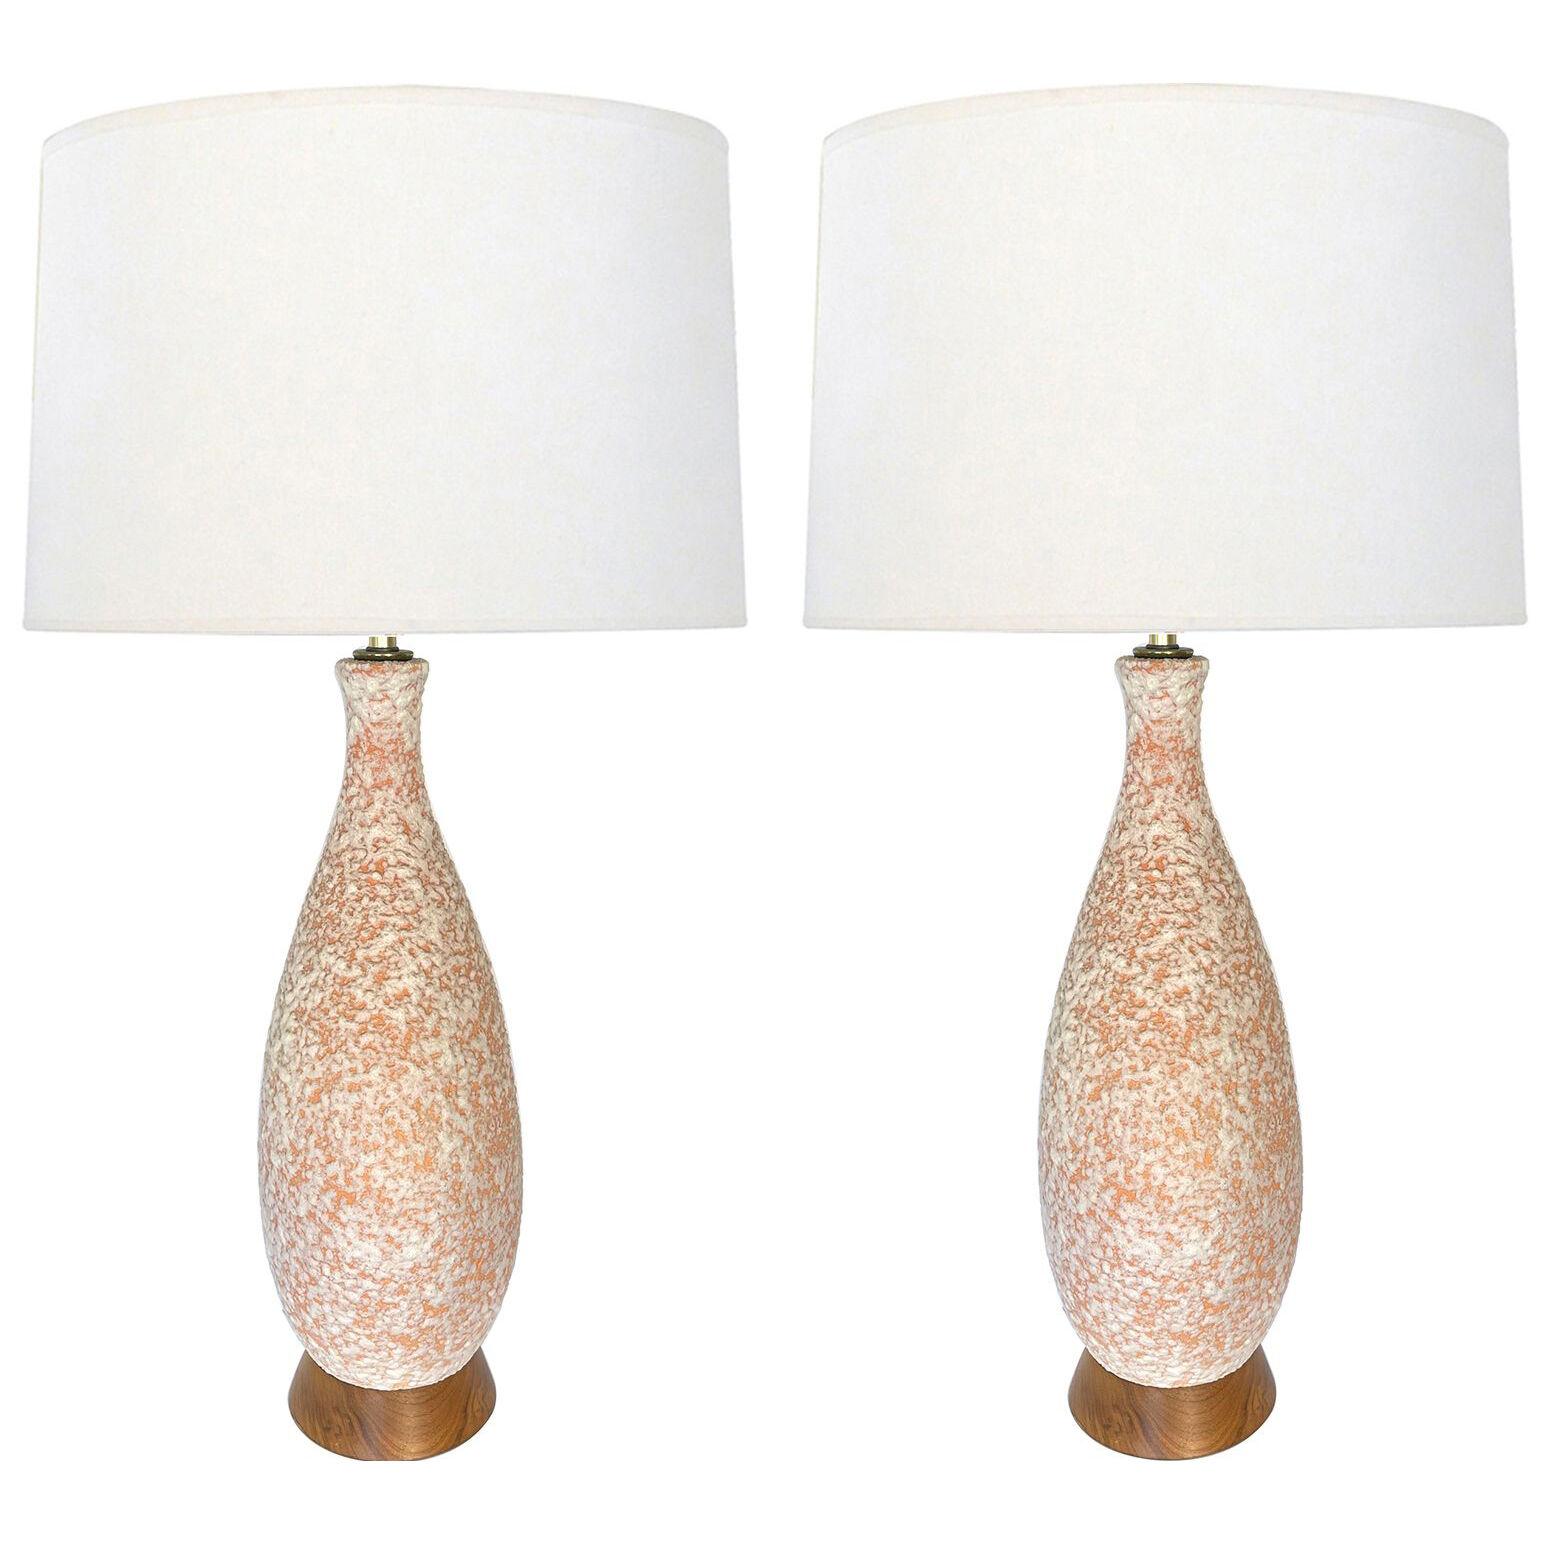 Pair of 1960's peach and white lava glaze bottle-form lamps